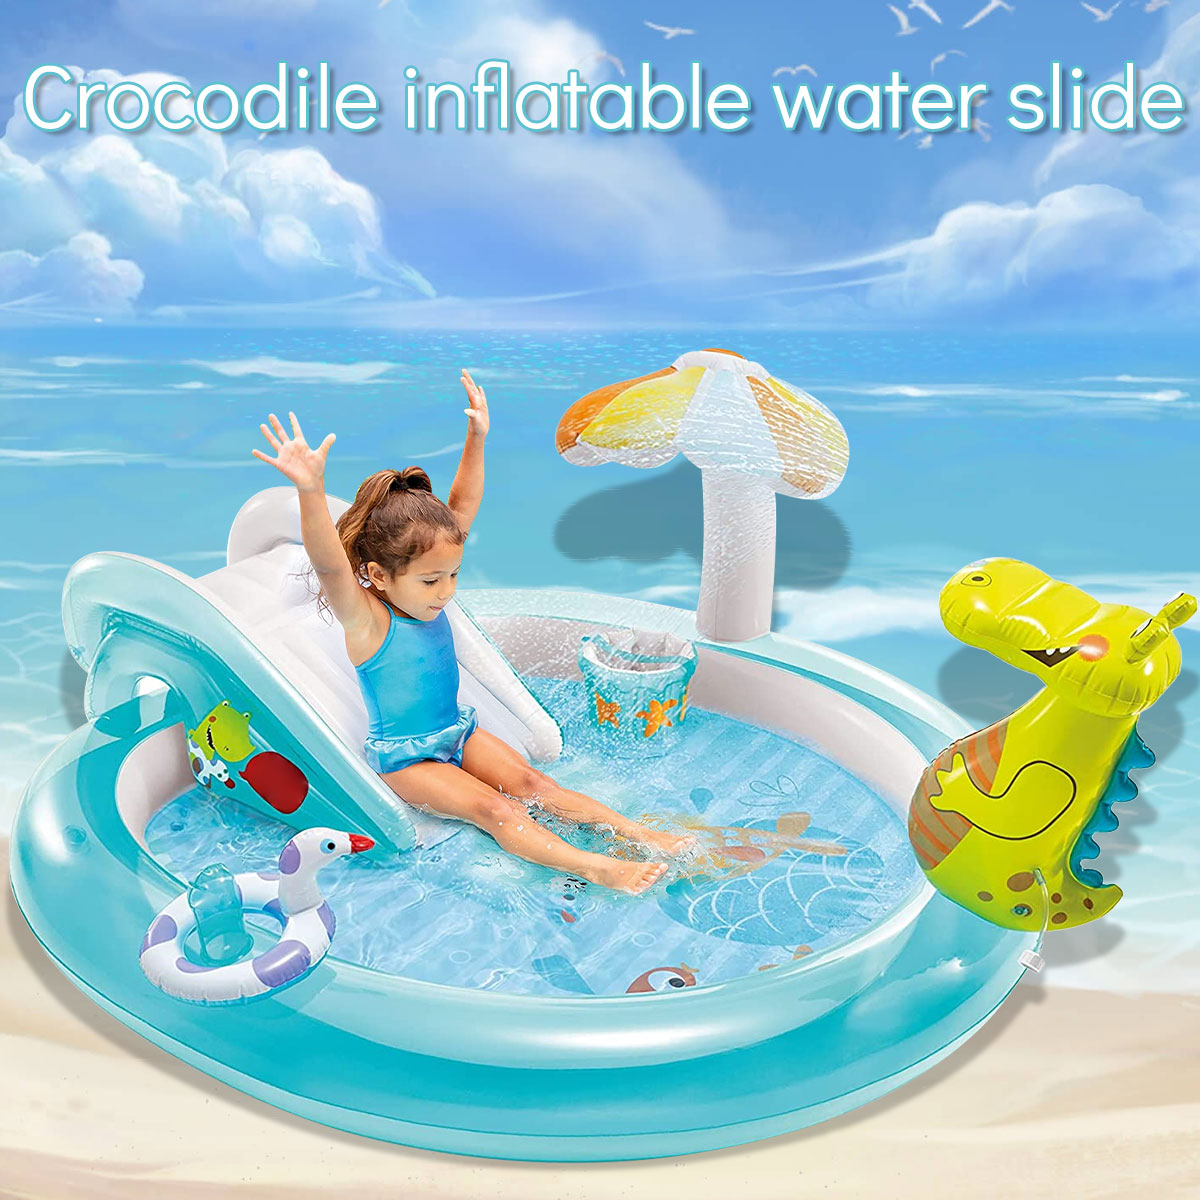 6.6 x 5.6 x 2.8ft Inflatable Play CenterSlide for Kids Backyard Water Park 180L Water Storage Capacity and 120 lbs Loading